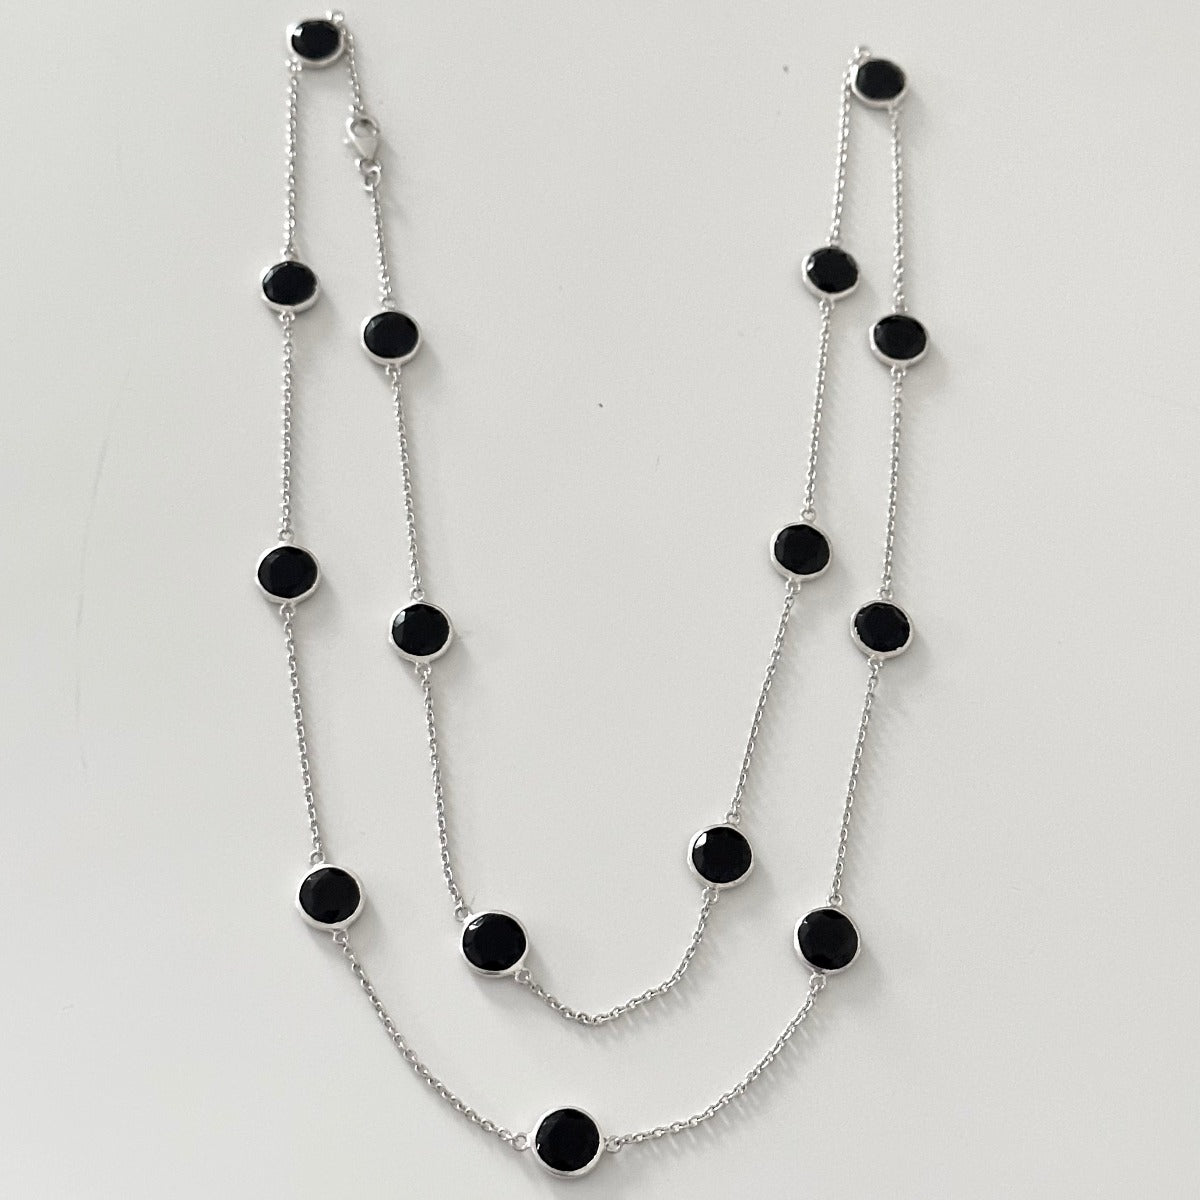 Black Onyx Gemstone Necklace in Sterling Silver